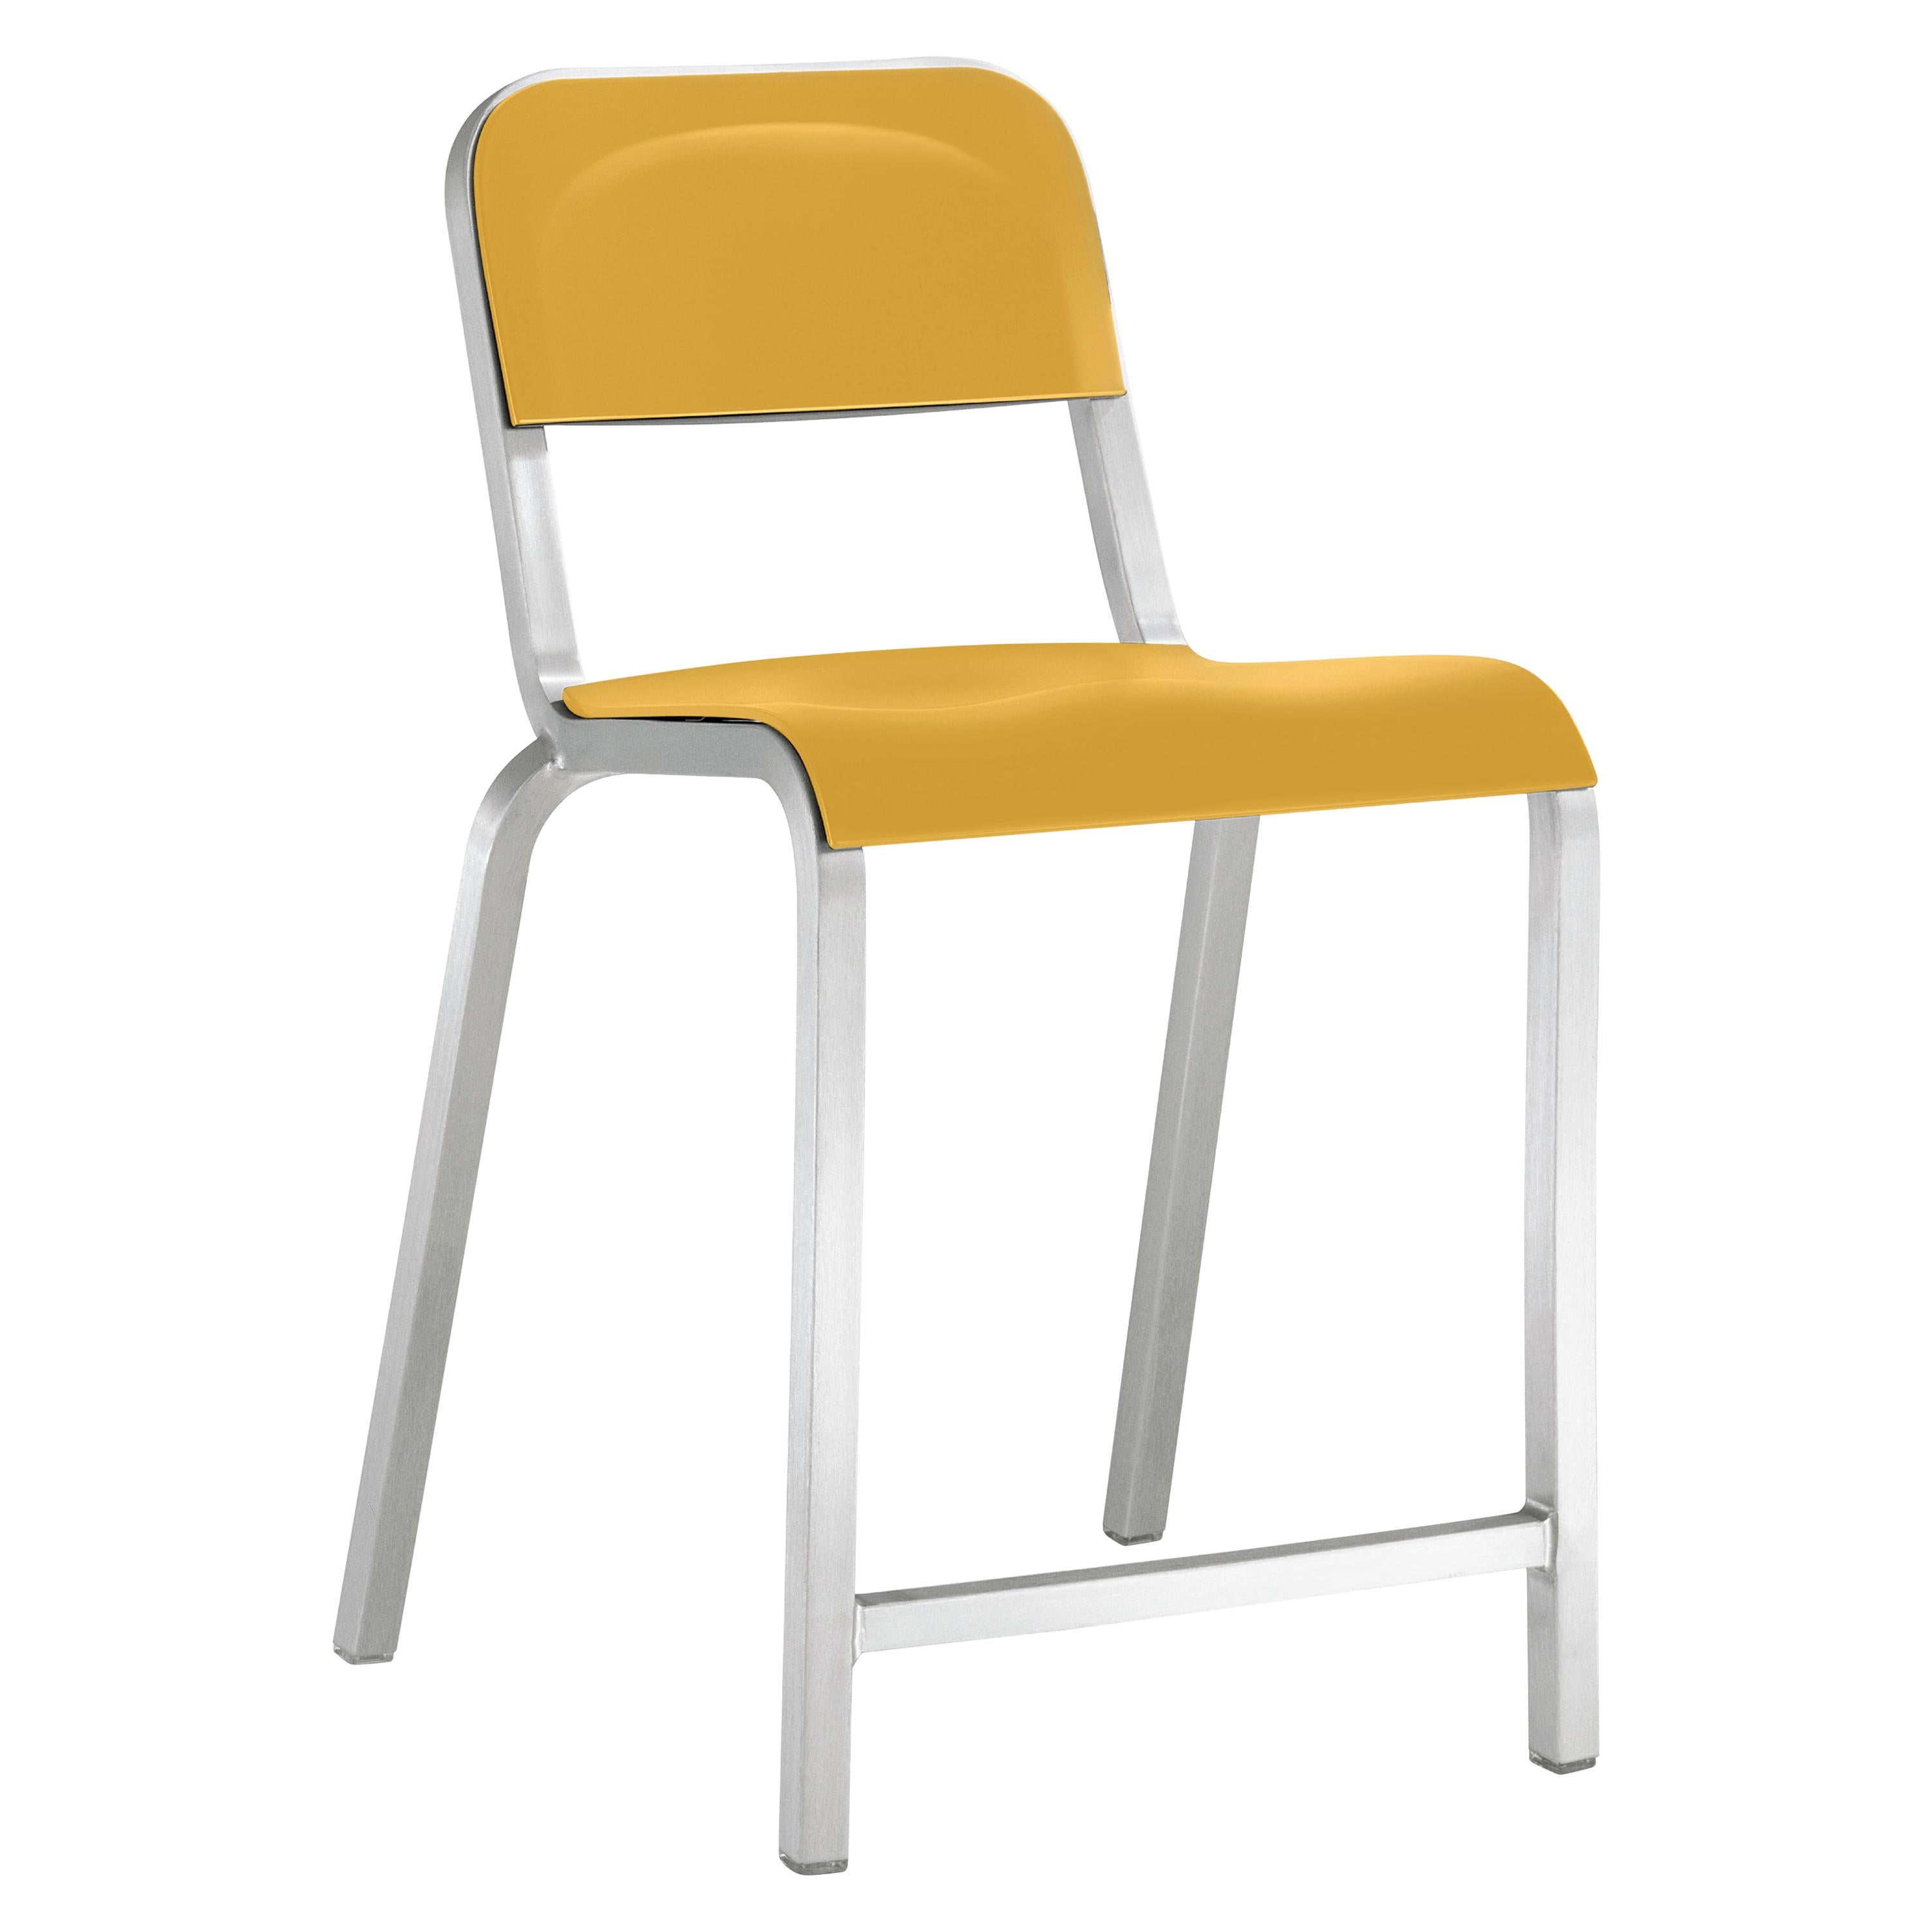 Emeco 1951 Aluminum Counter Stool with Yellow Seat by Adrian Van Hooydonk For Sale